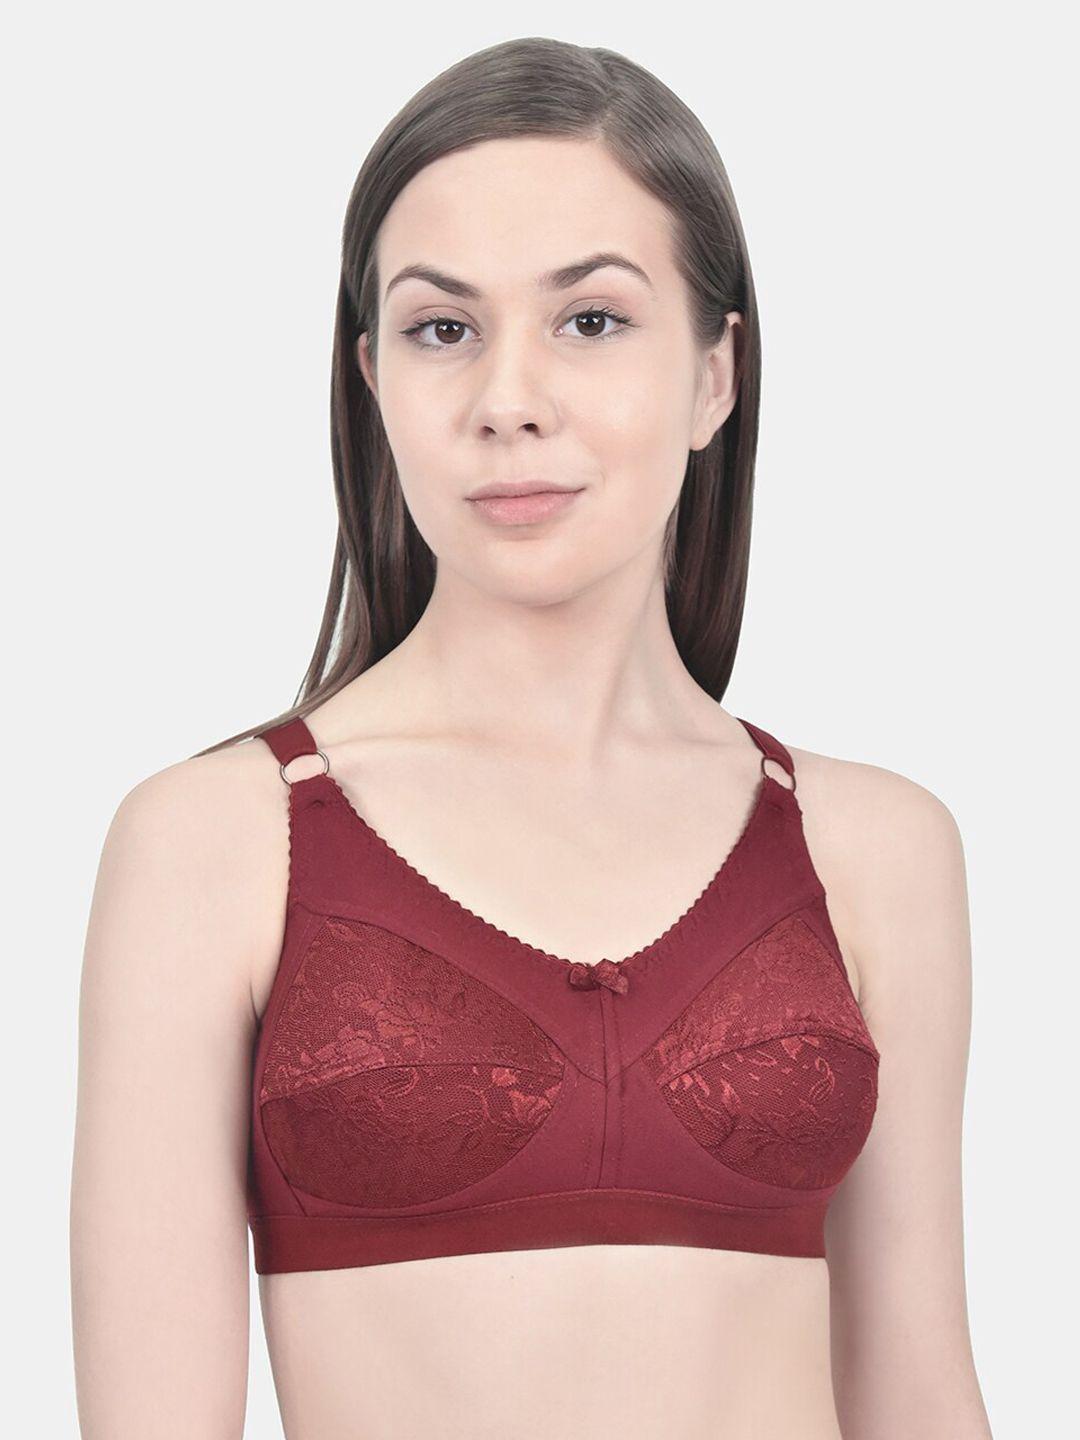 innocence-maroon-lace-non-wired-non-padded-minimizer-bra